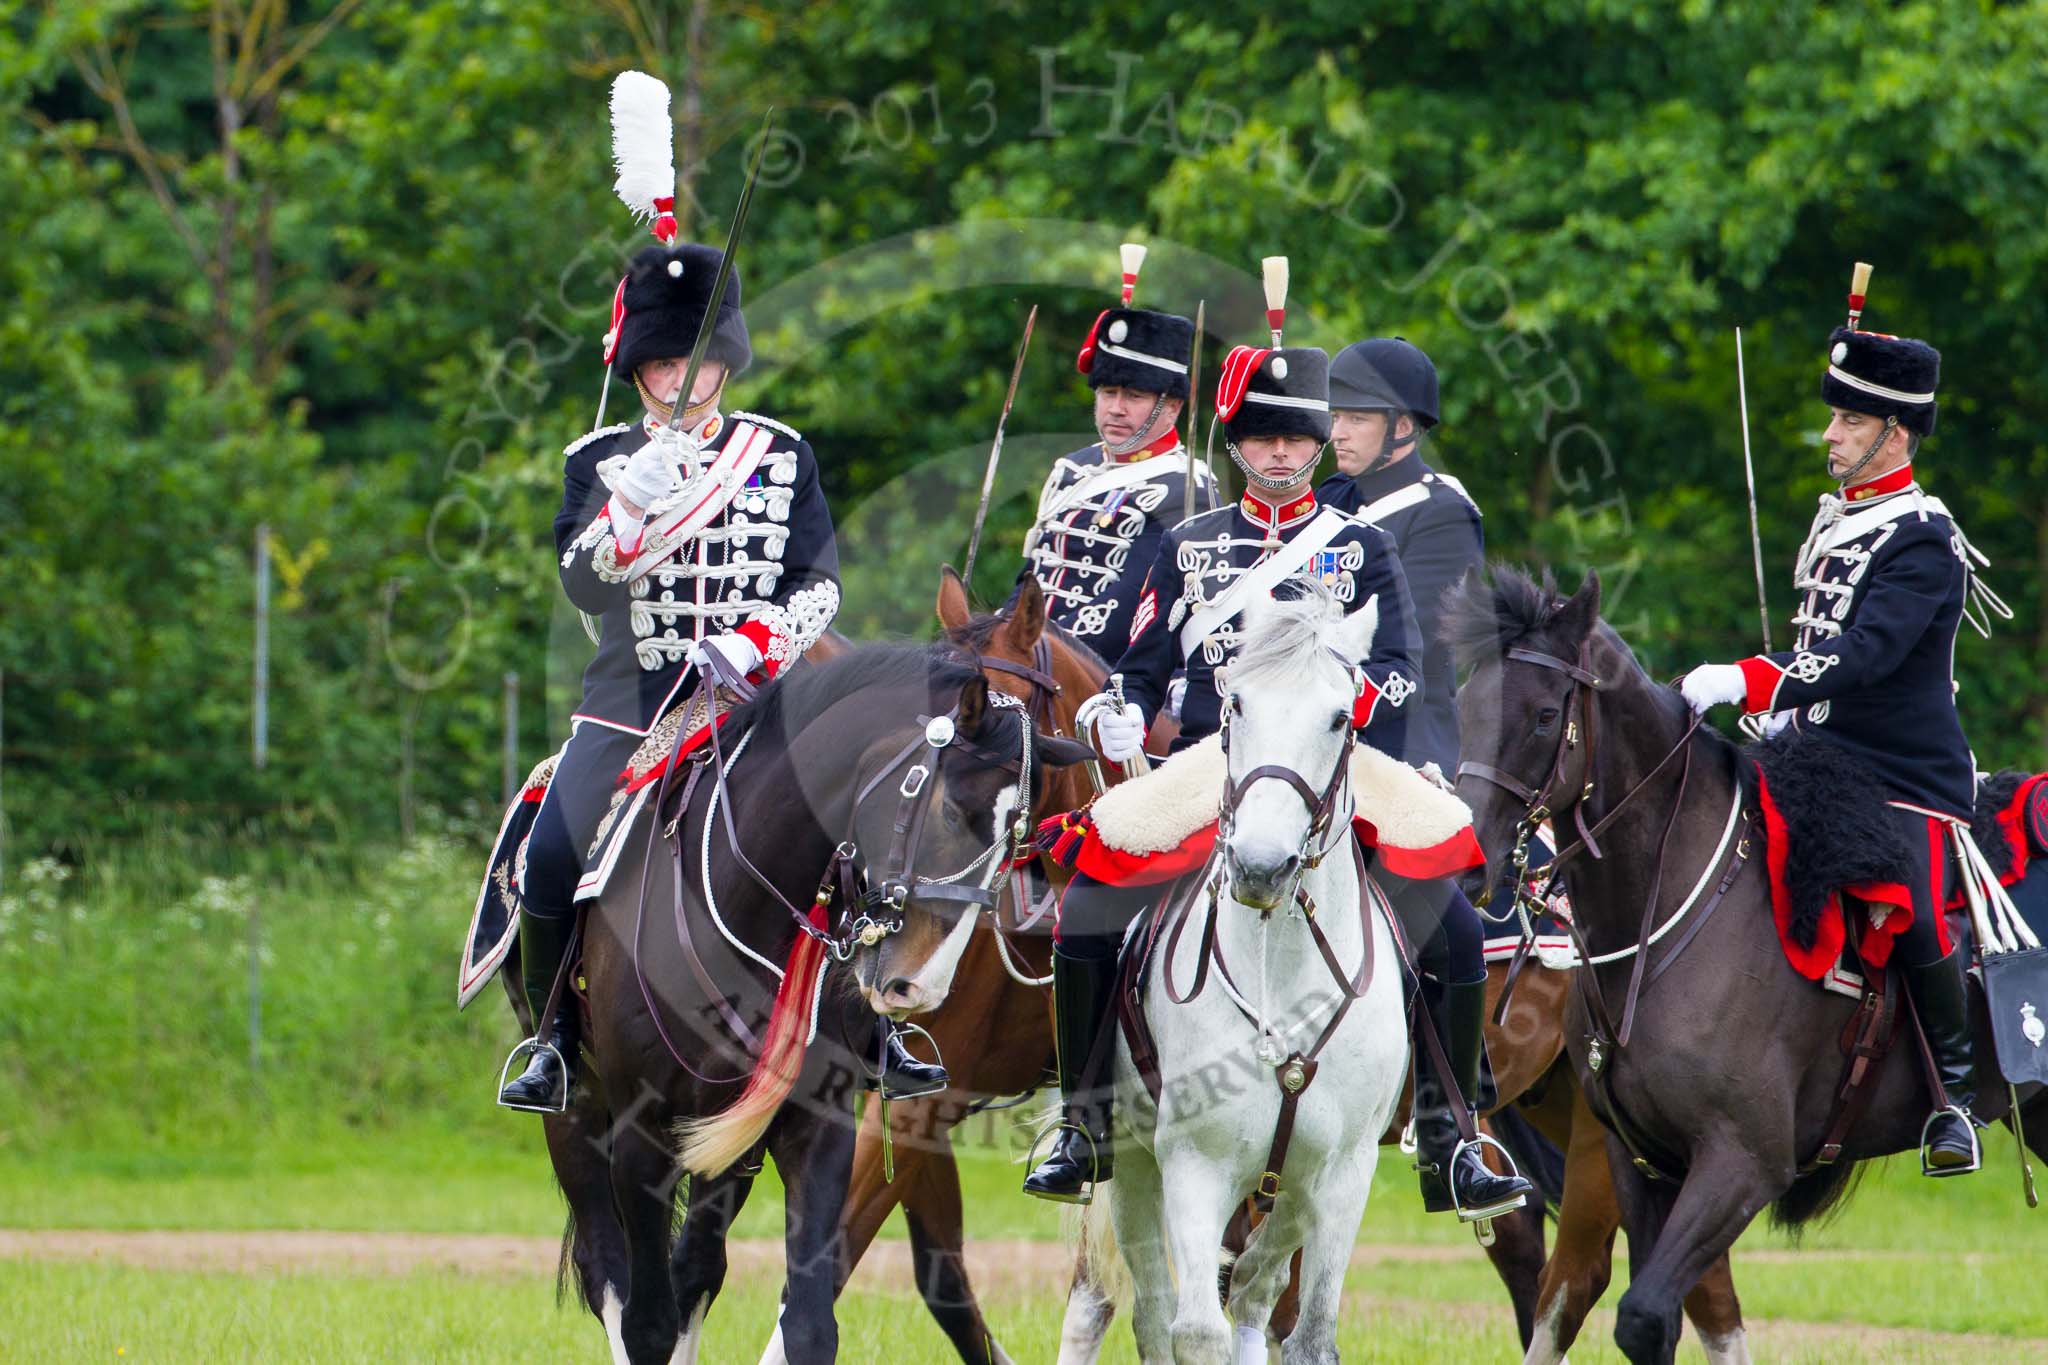 The Light Cavalry HAC Annual Review and Inspection 2013.
Windsor Great Park Review Ground,
Windsor,
Berkshire,
United Kingdom,
on 09 June 2013 at 13:35, image #441